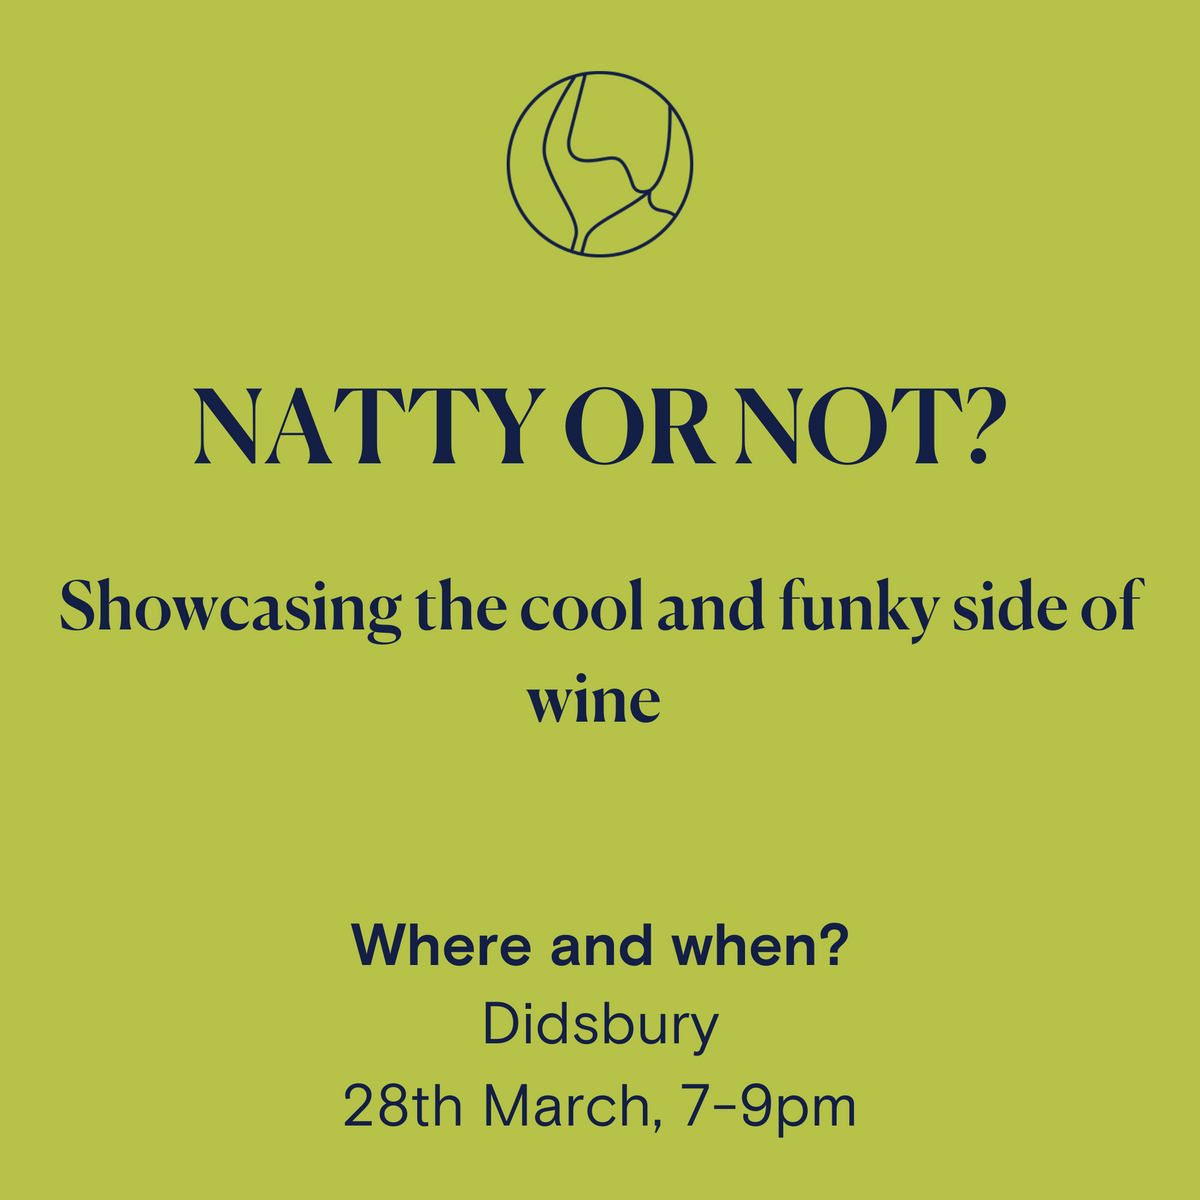 Natty or Not? Natural Wine Tasting at Didsbury, 28th March